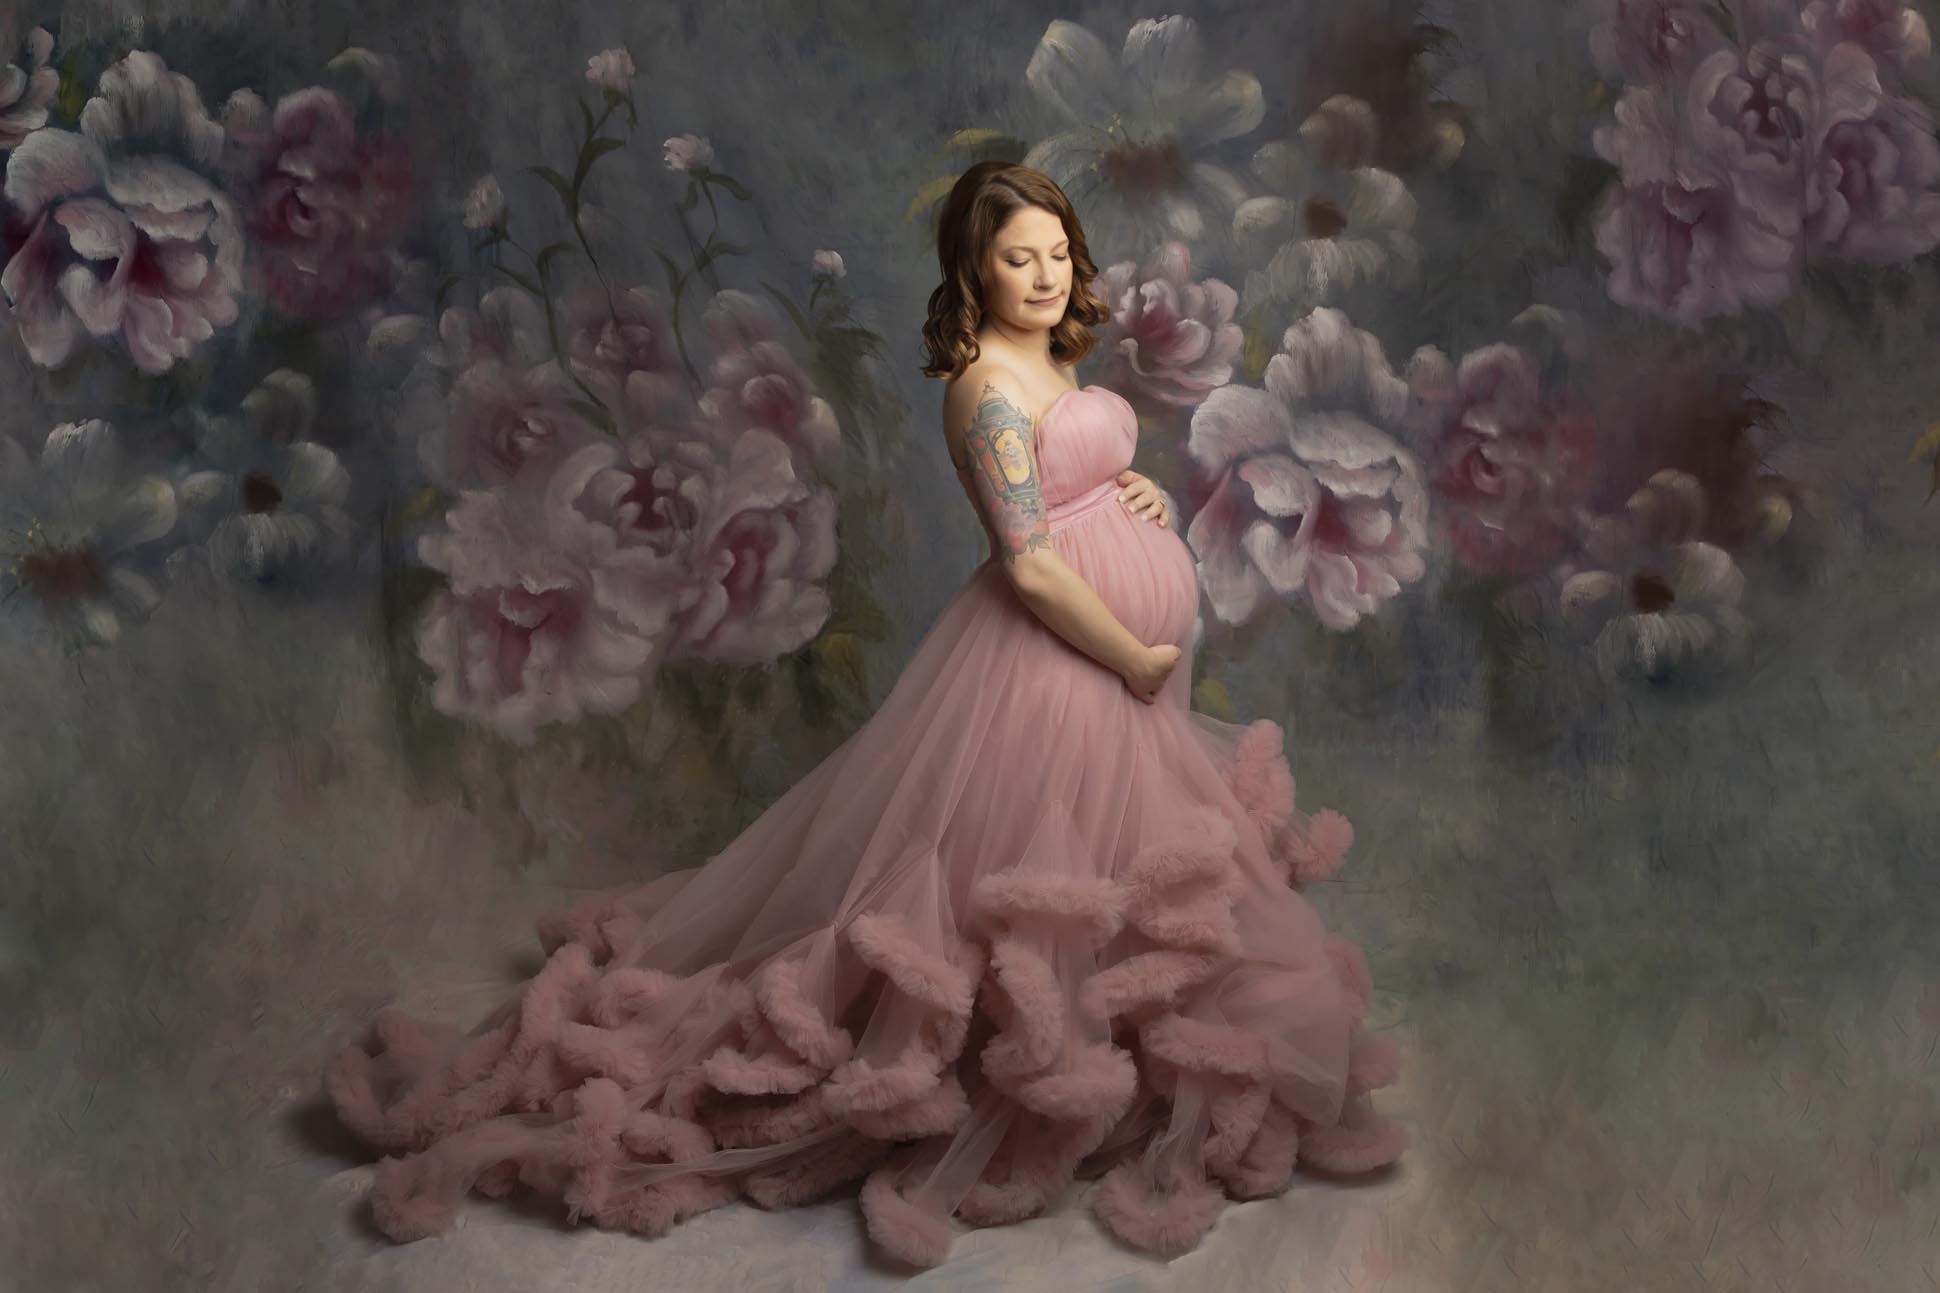 Dallas maternity photographer displays portrait of pregnant mom wearing pink princess style ballgown posing on a hand painted floral backdrop